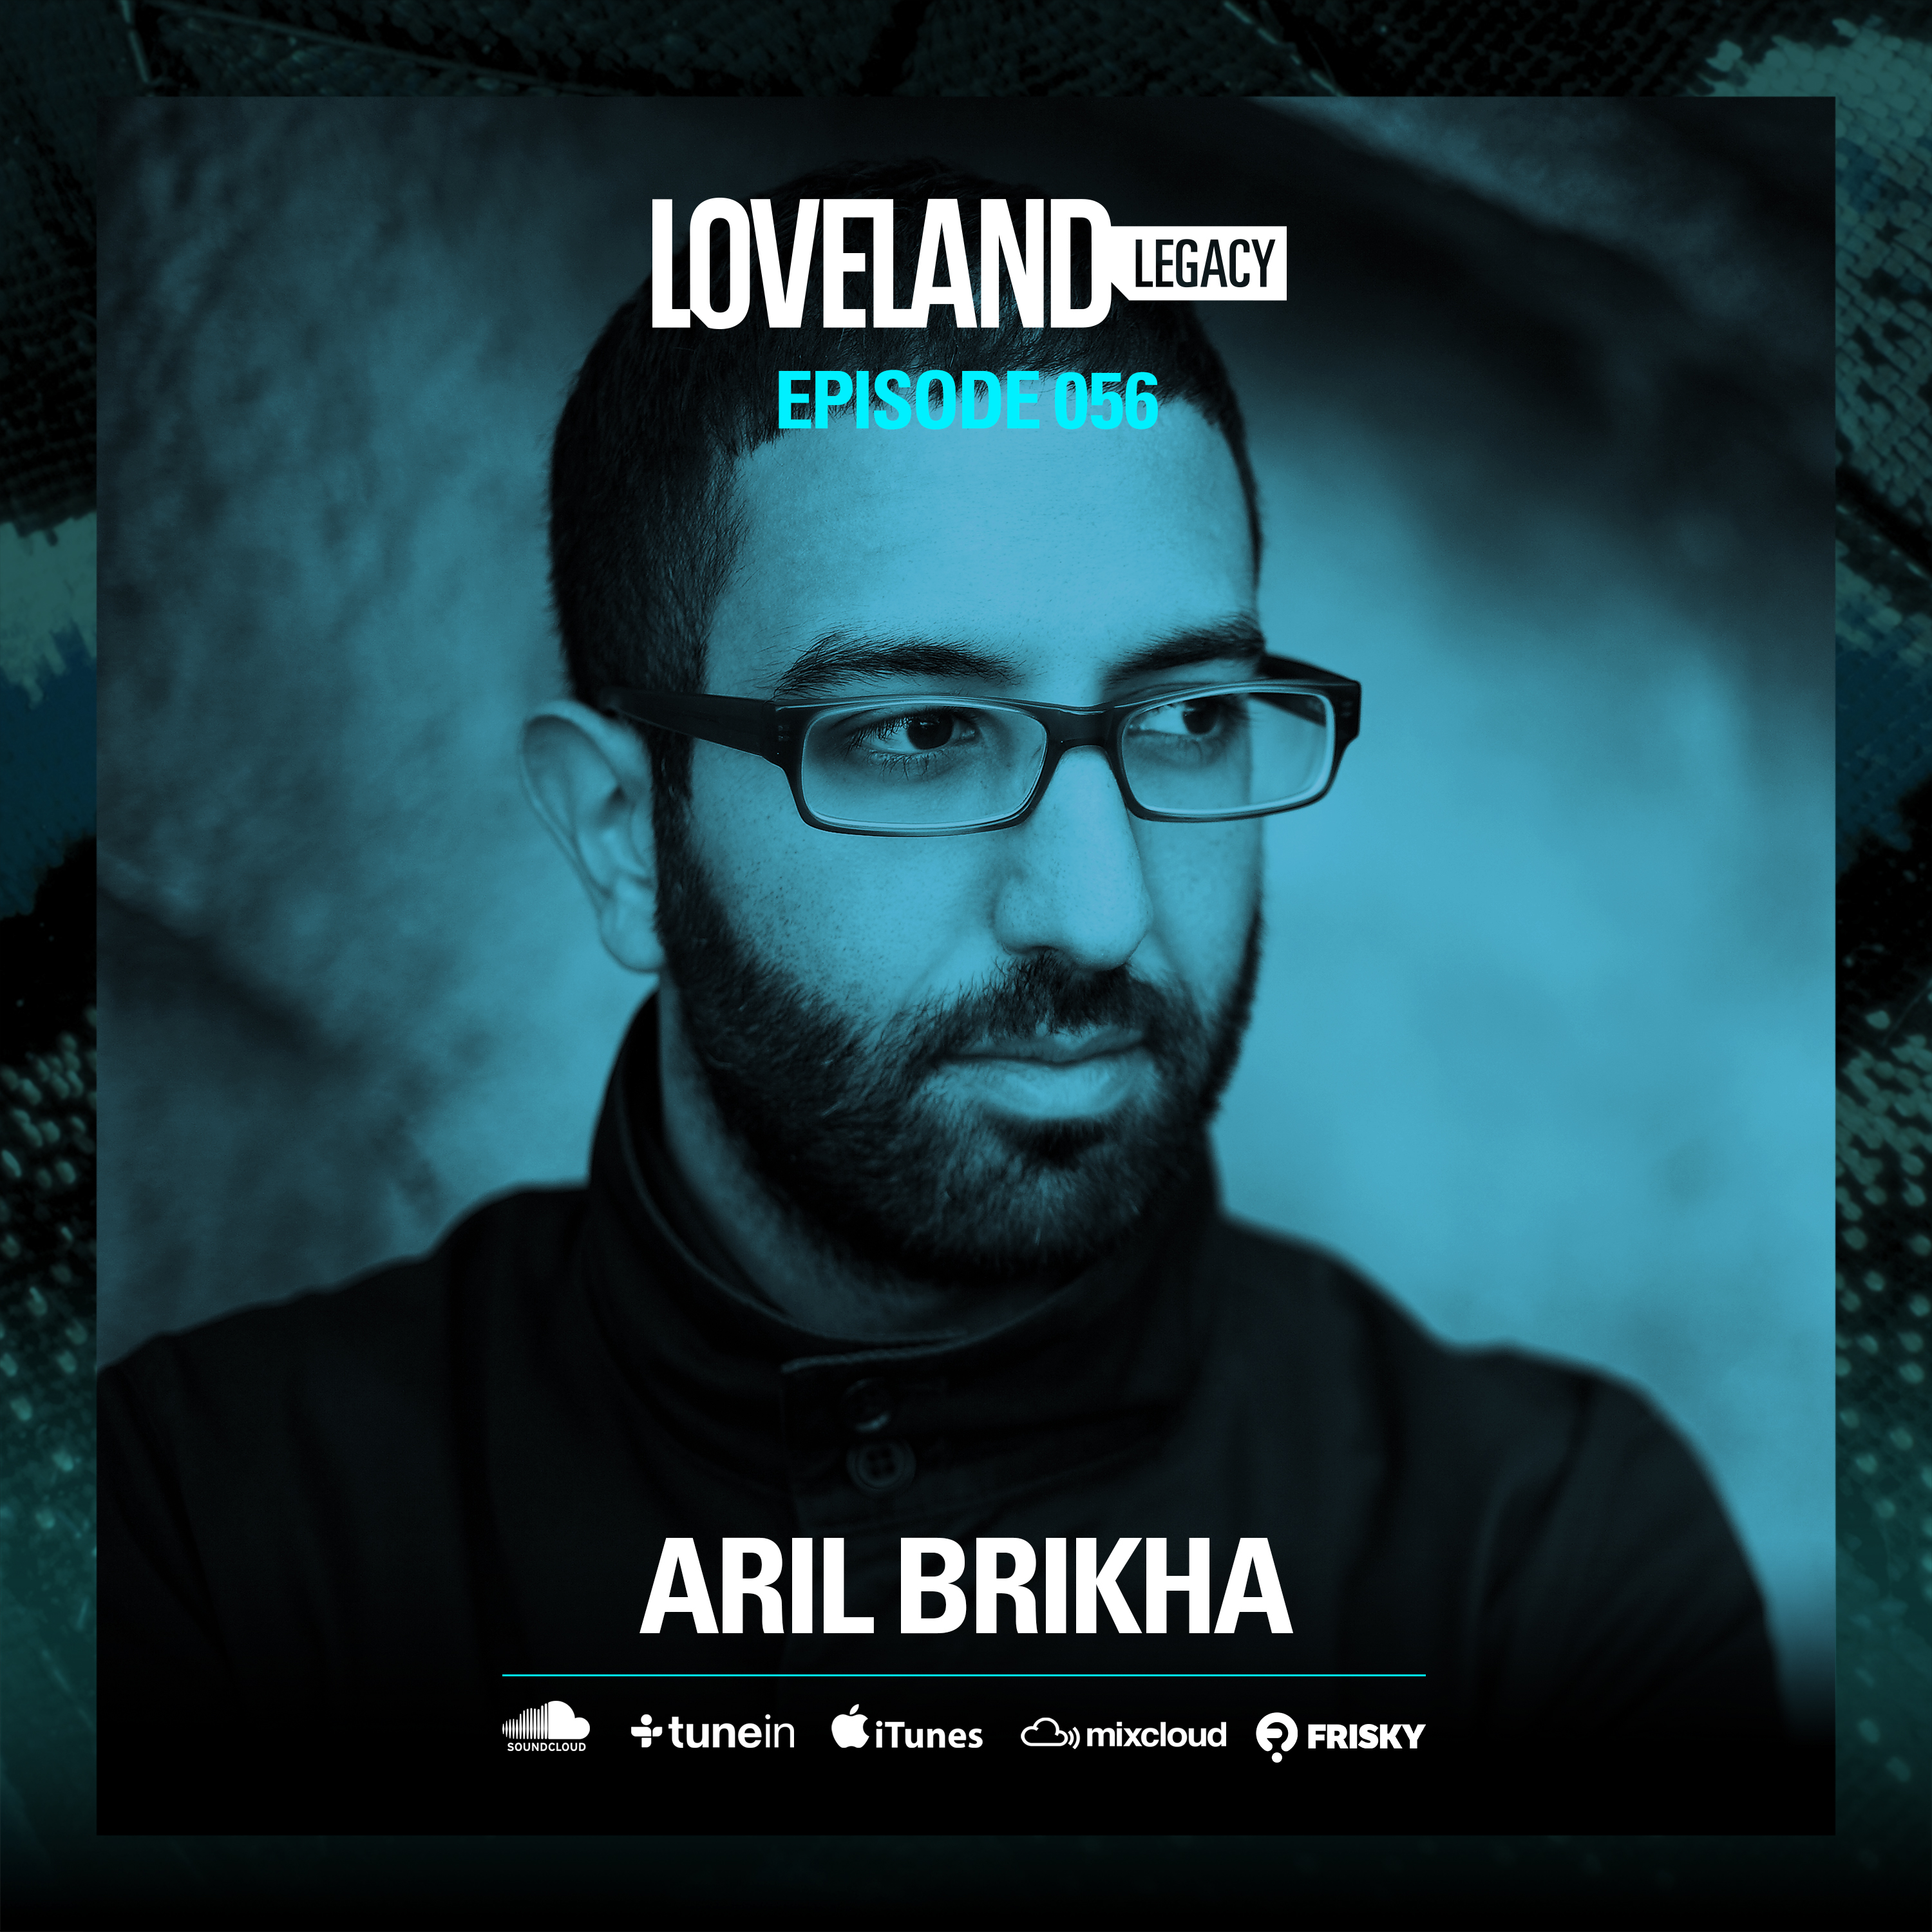 Aril Brikha is one of the world's leading Assyrian techno musicians. Since forging an alliance with Transmat, Brikha has toured solidly with his live show, playing everywhere from huge festivals to famous clubs all over the world. On January 1st 2015 Aril was our guest at Loveland Live. Listen and enjoy.